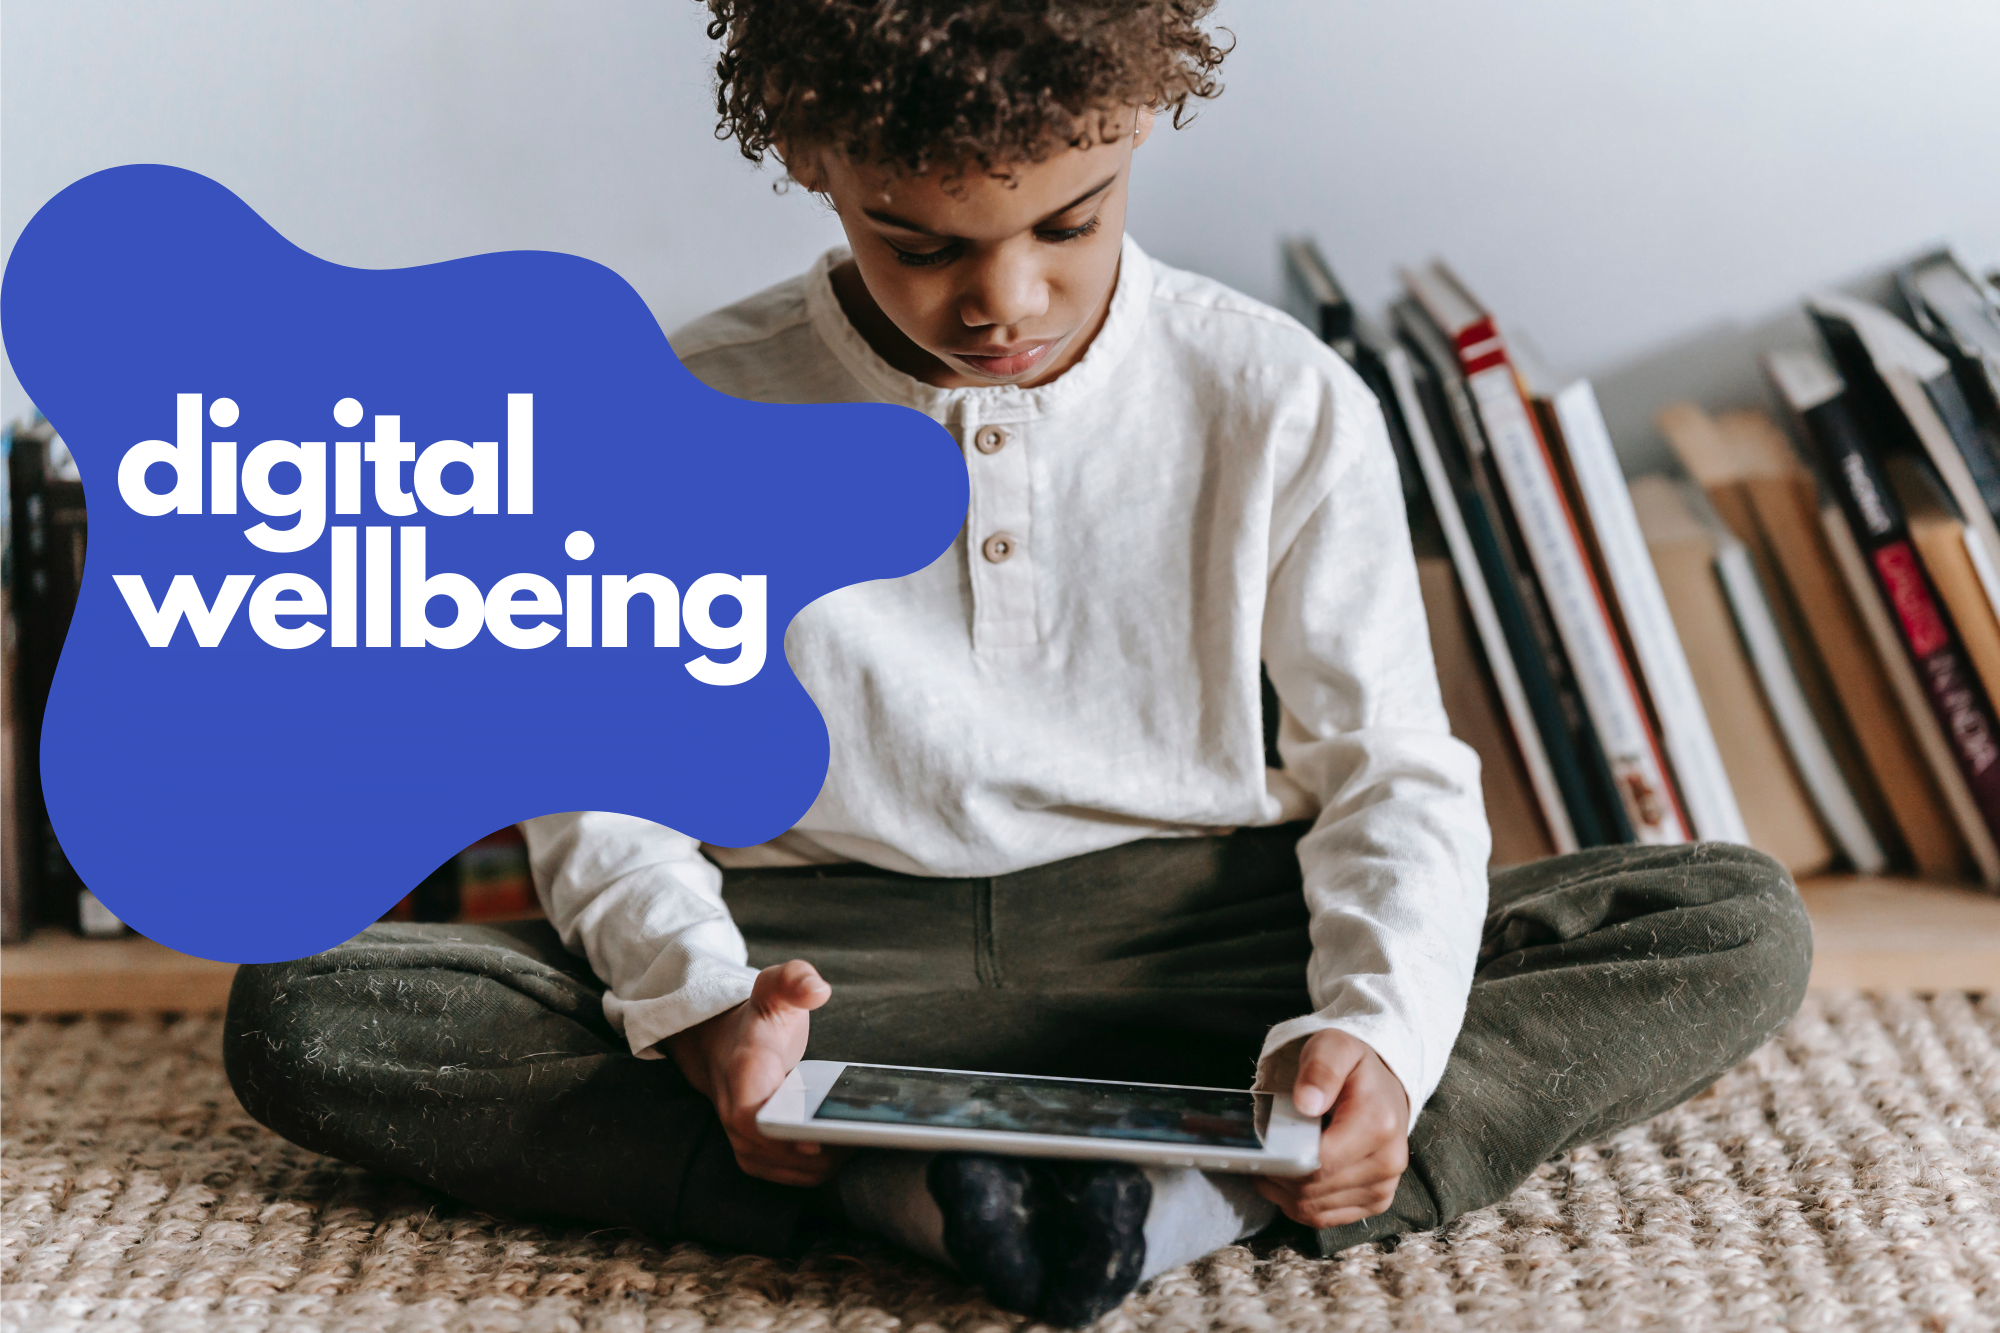 digital wellbeing and parental controls